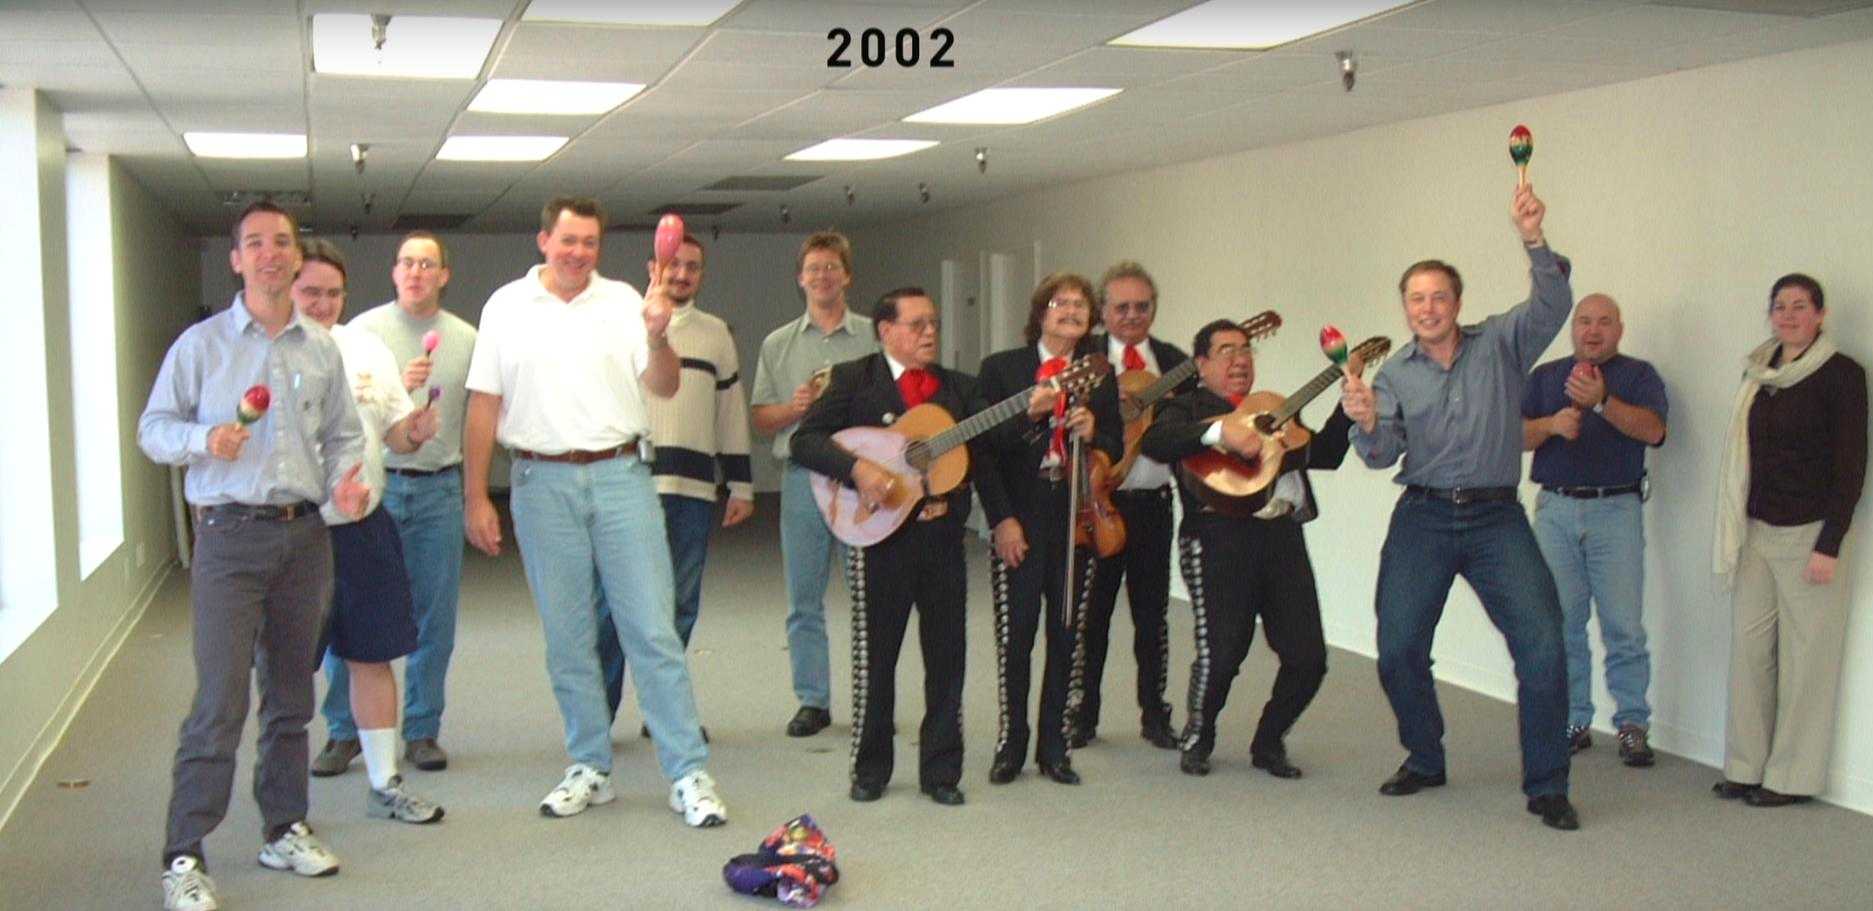 SpaceX employees with a mariachi band